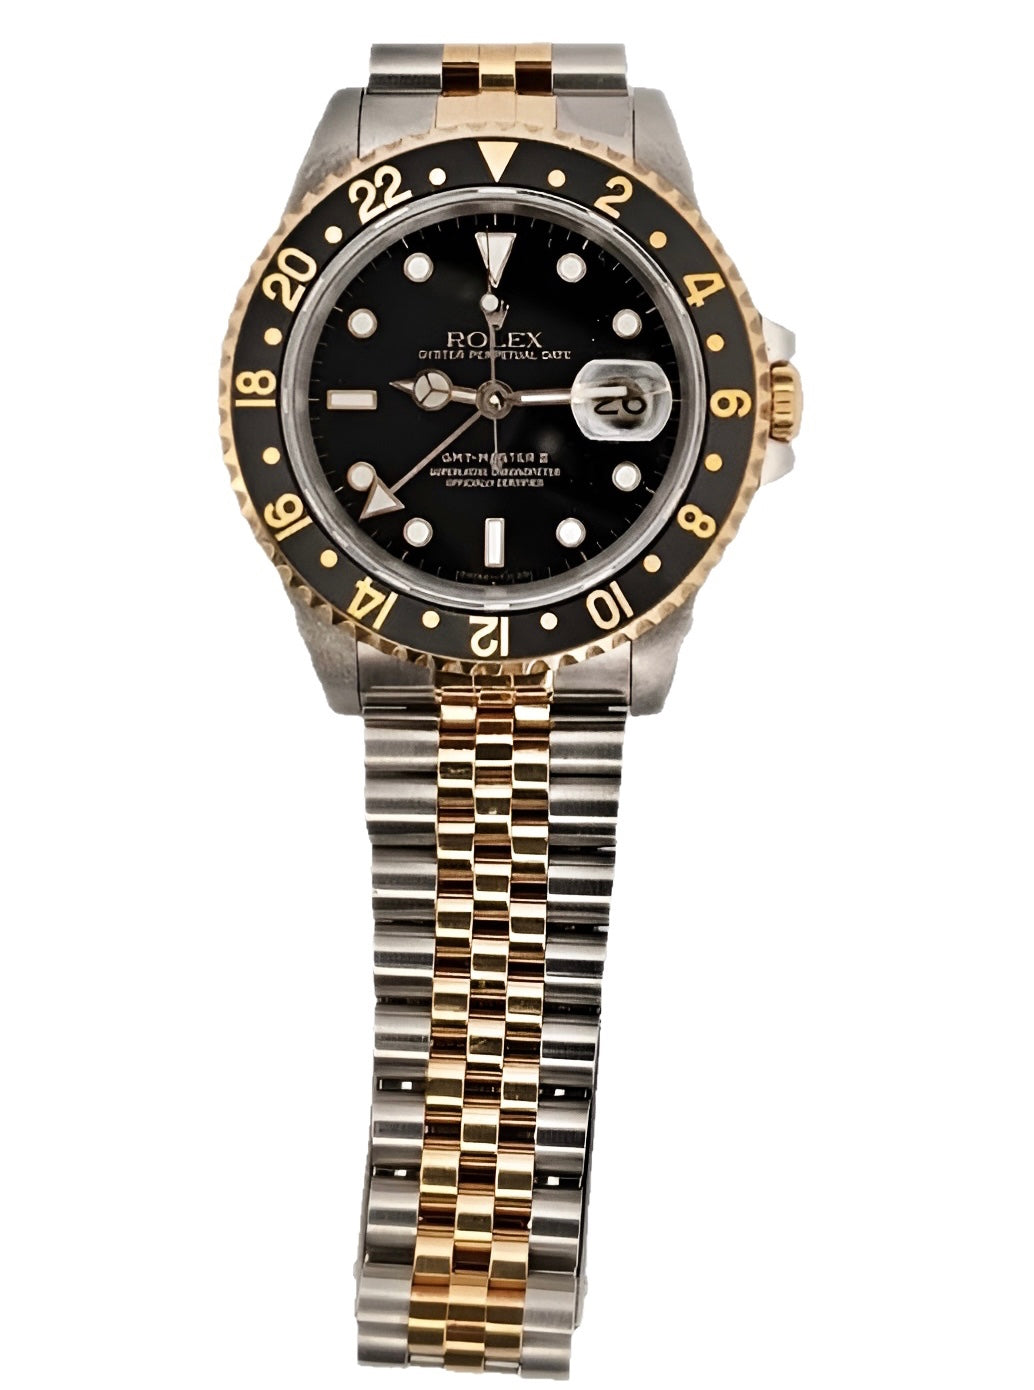 Rolex GMT Master II with box and papers